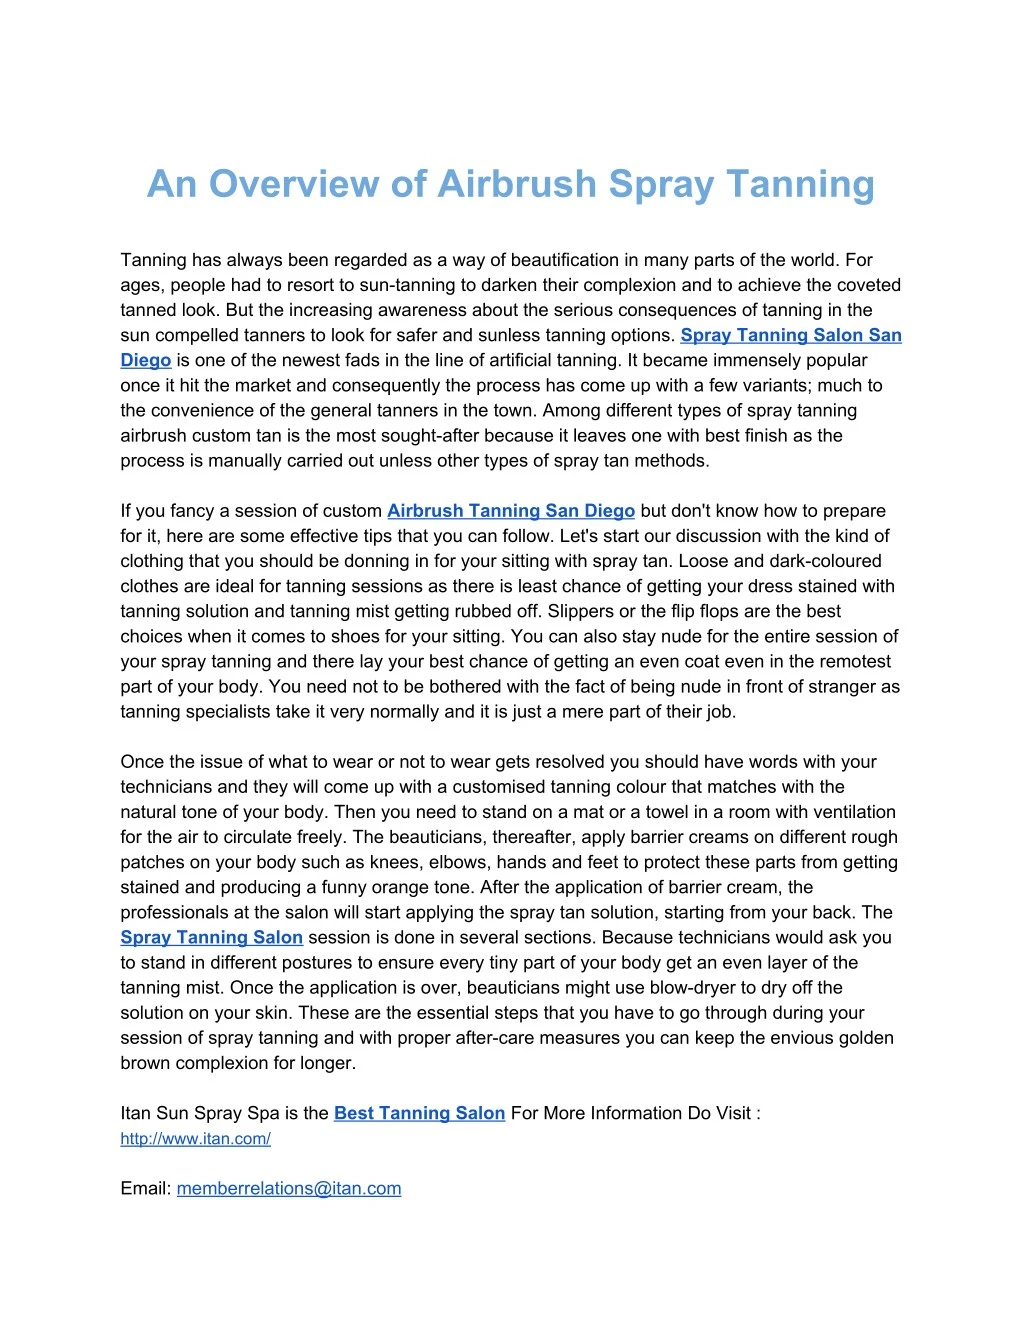 an overview of airbrush spray tanning